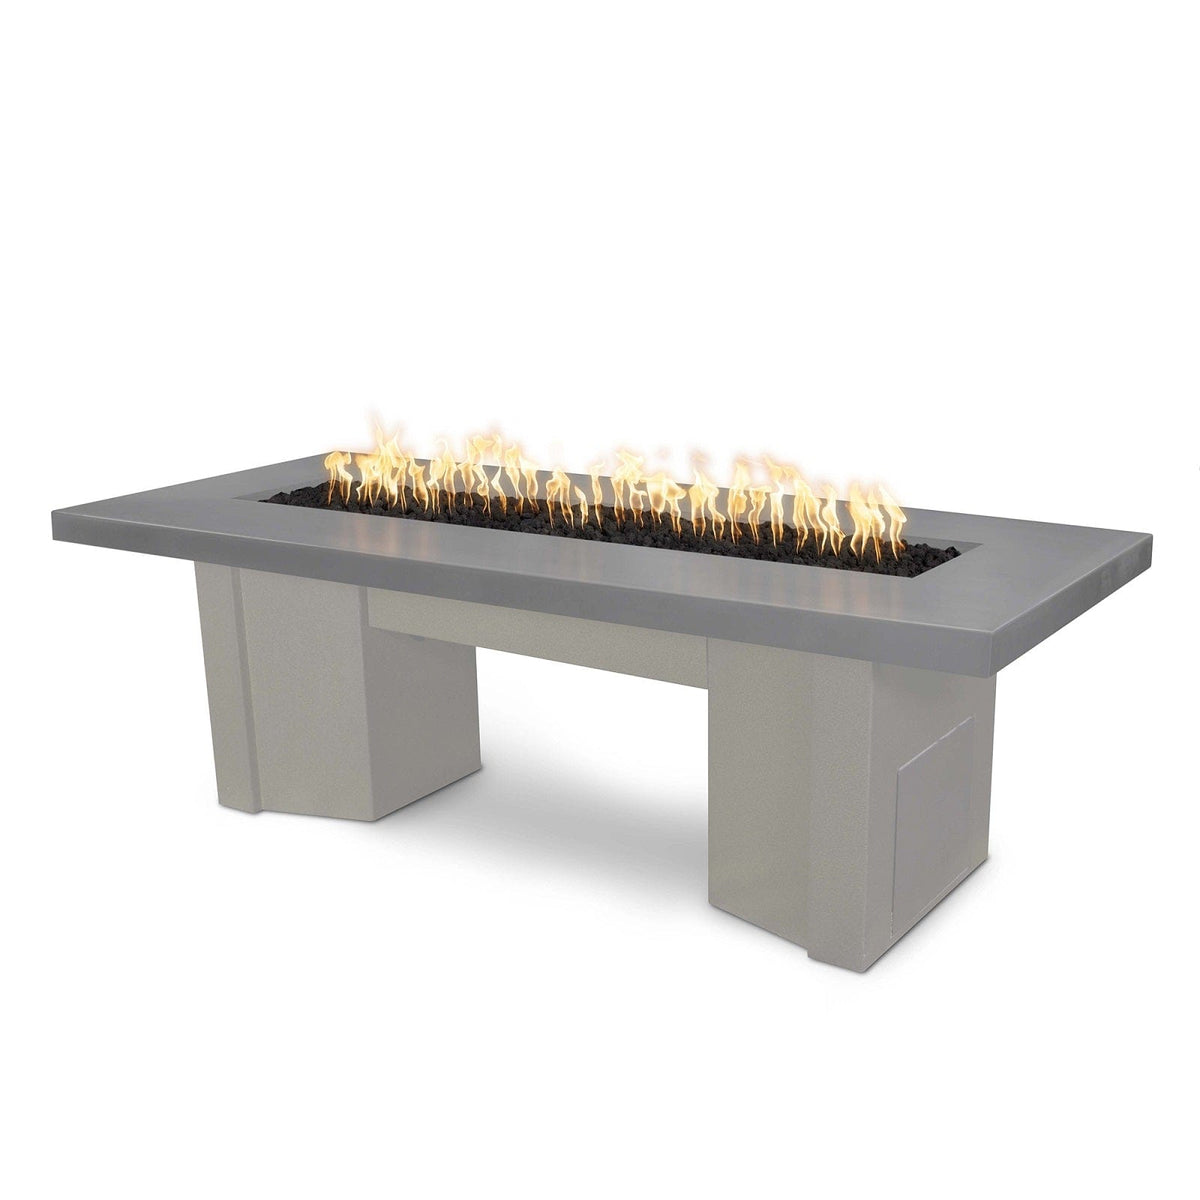 The Outdoor Plus Fire Features Natural Gray (-NGY) / Pewter Powder Coated Steel (-PEW) The Outdoor Plus 78&quot; Alameda Fire Table Smooth Concrete in Liquid Propane - Match Lit / OPT-ALMGFRC78-LP